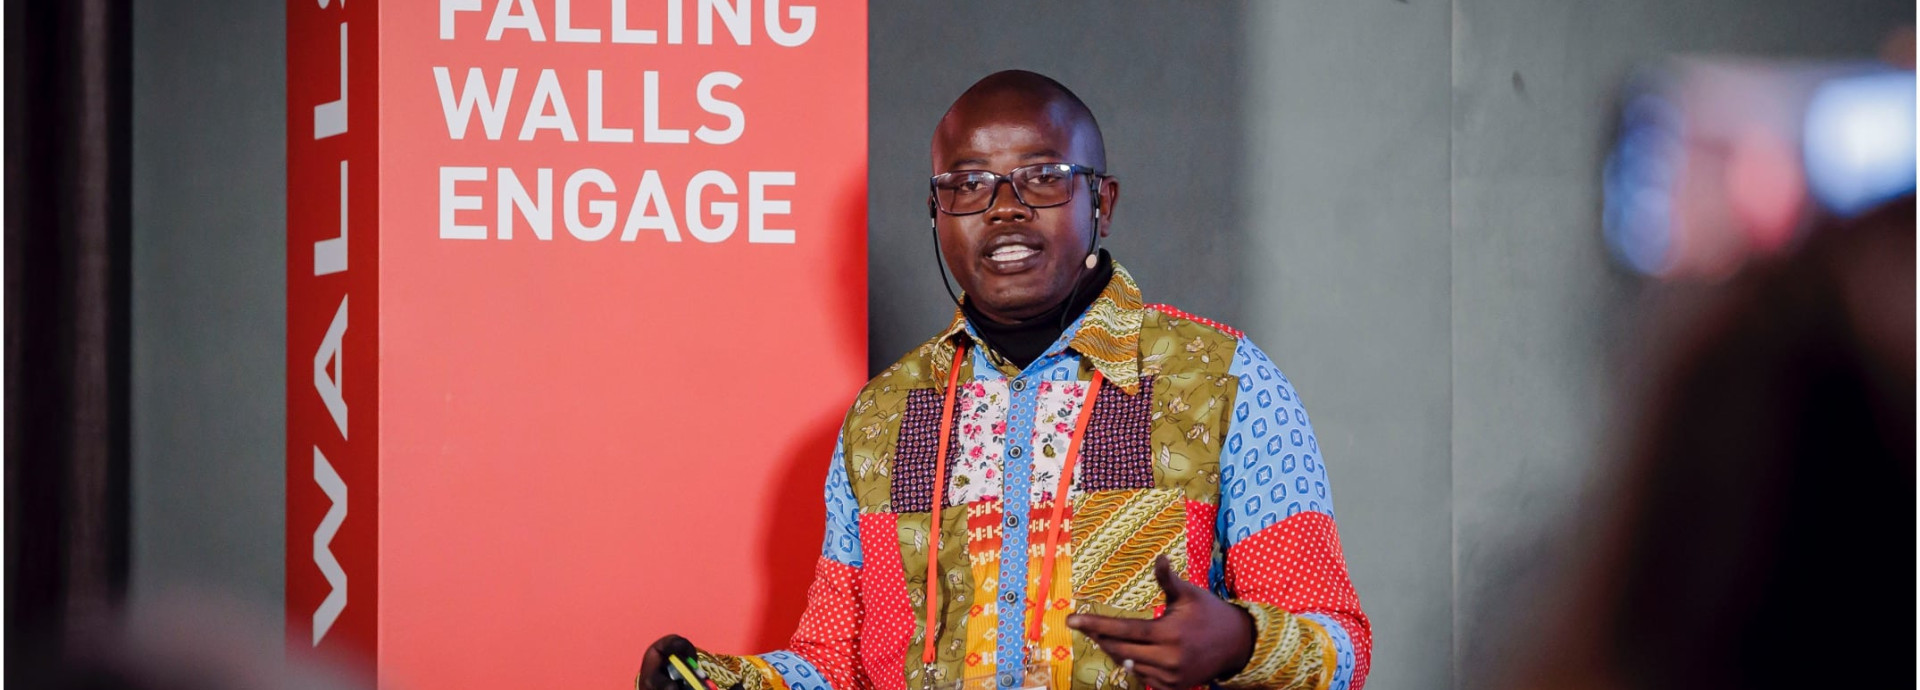 THABISO MASHABA presenting at the stage of the Falling Walls Engage